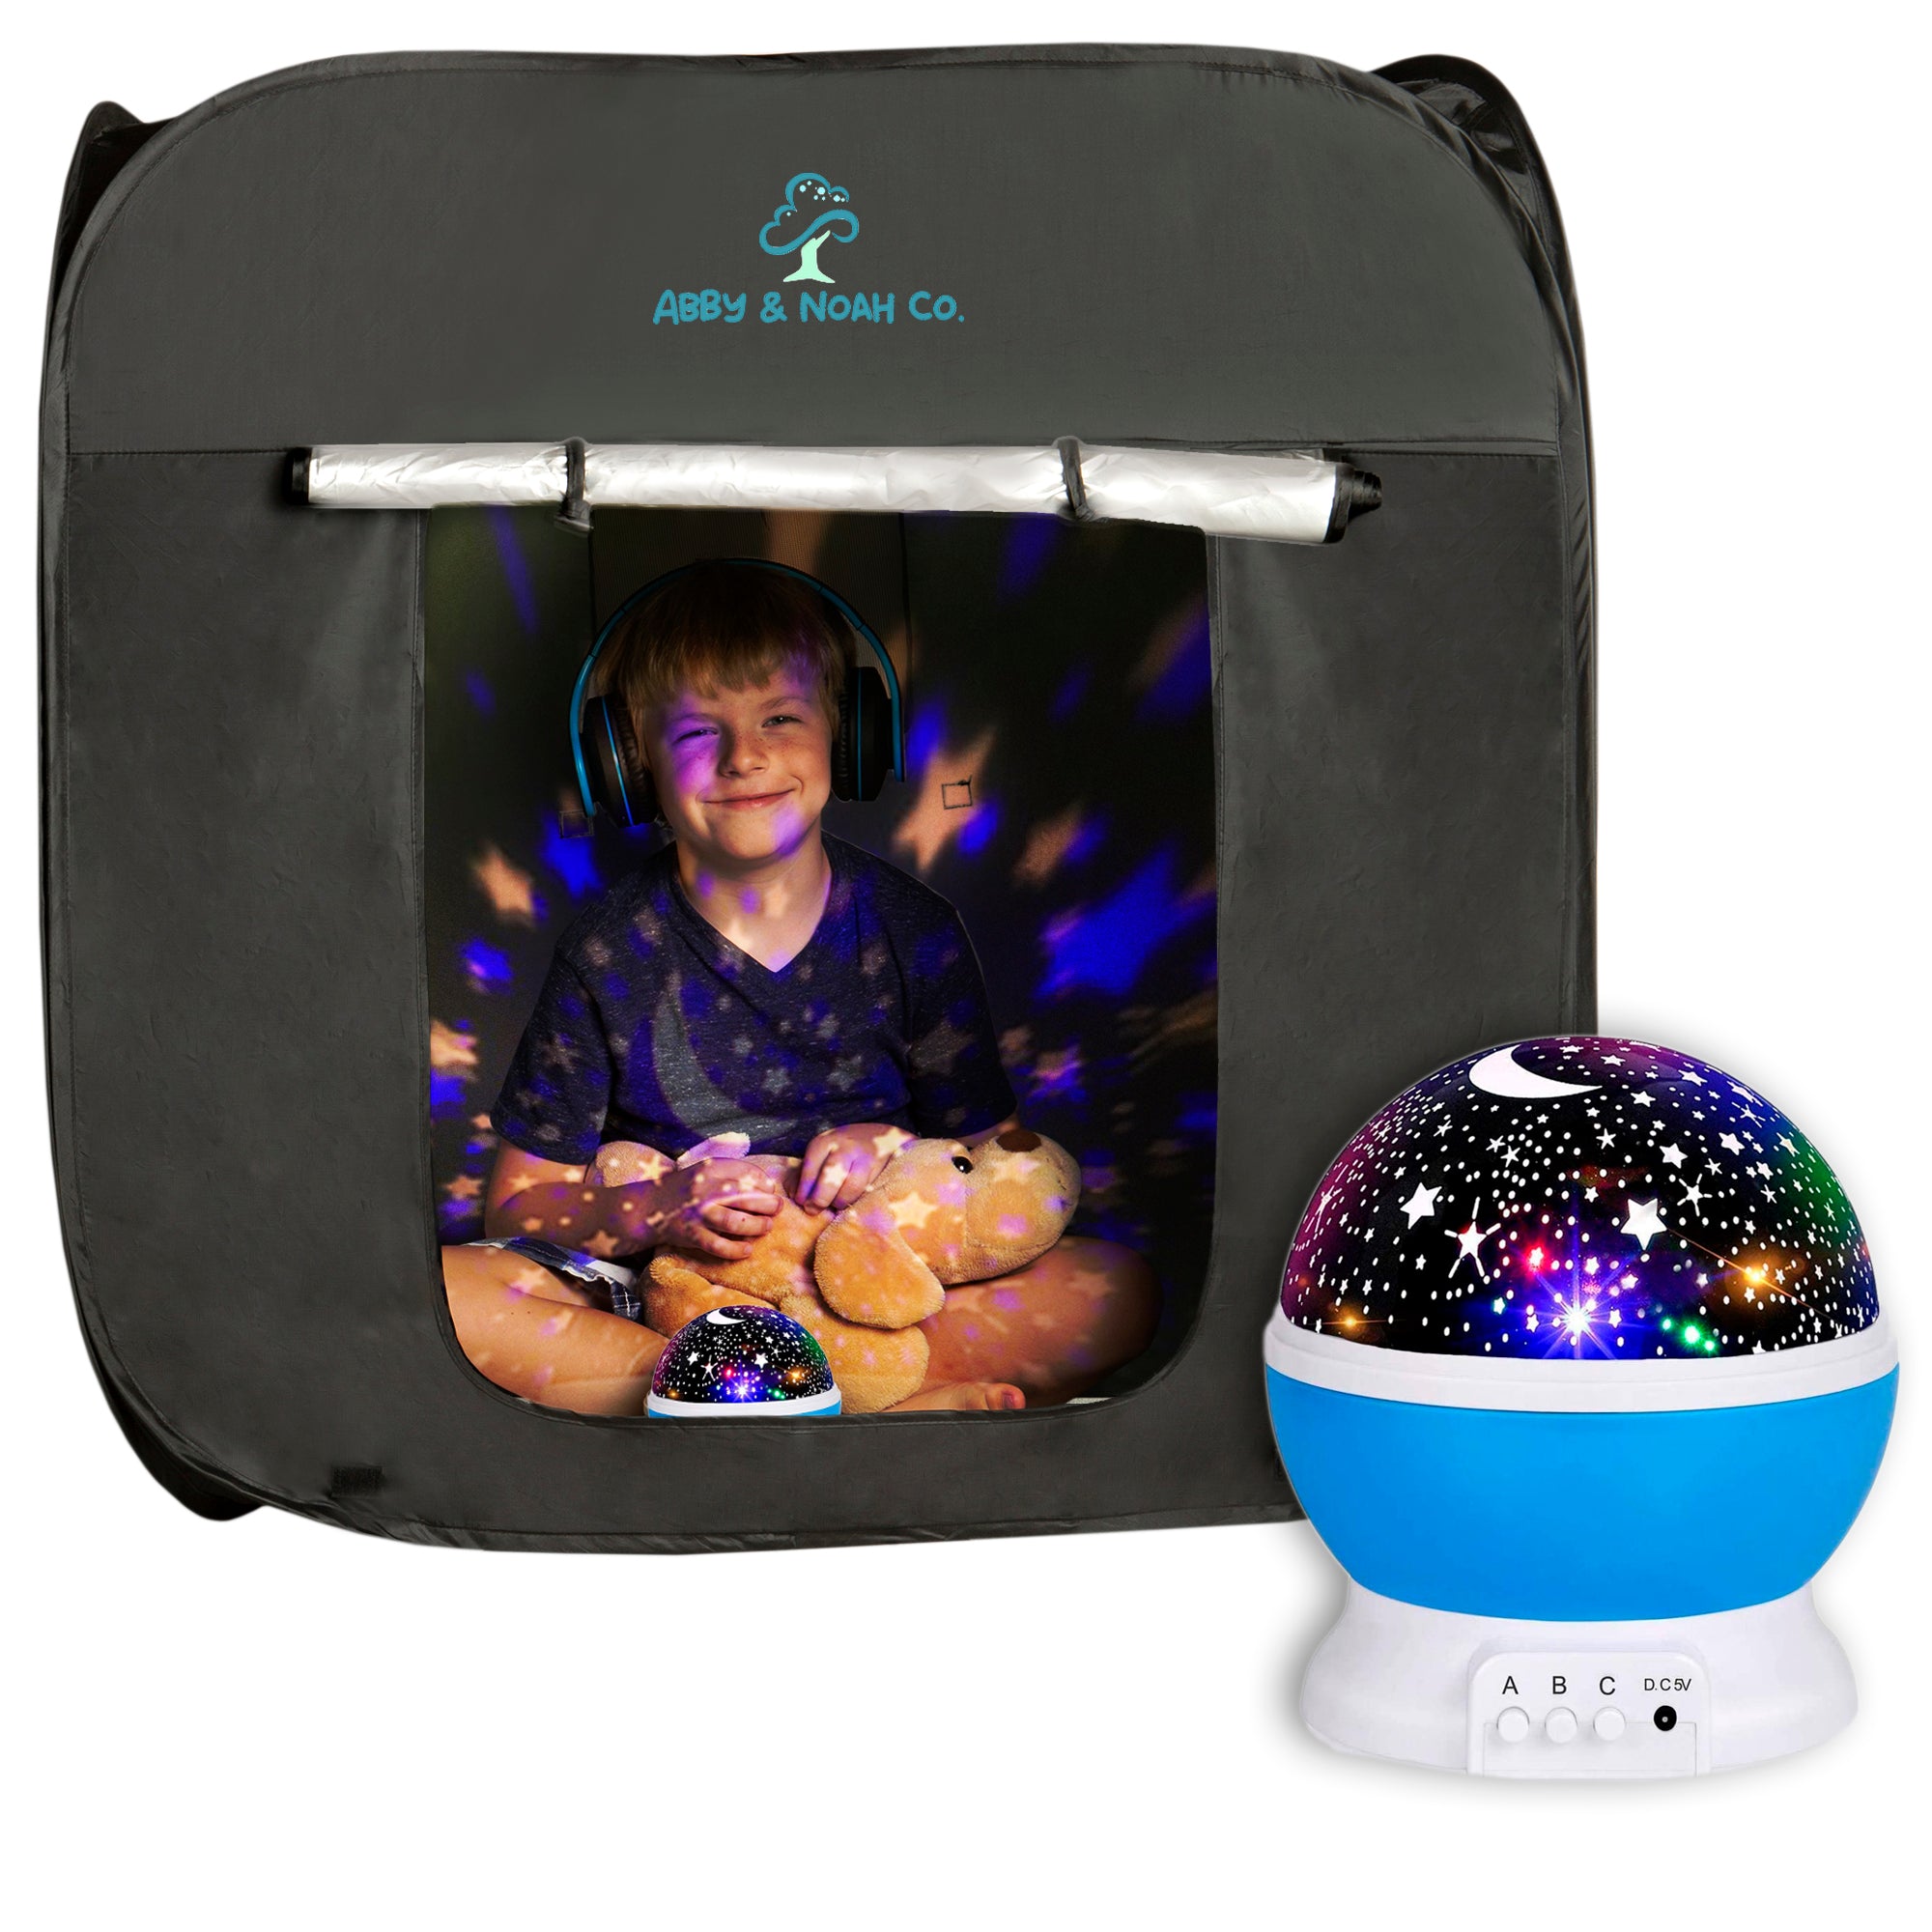 Therapist-Designed Sensory Blackout Tent for Kids WITH Complimentary Galaxy  Light Projector